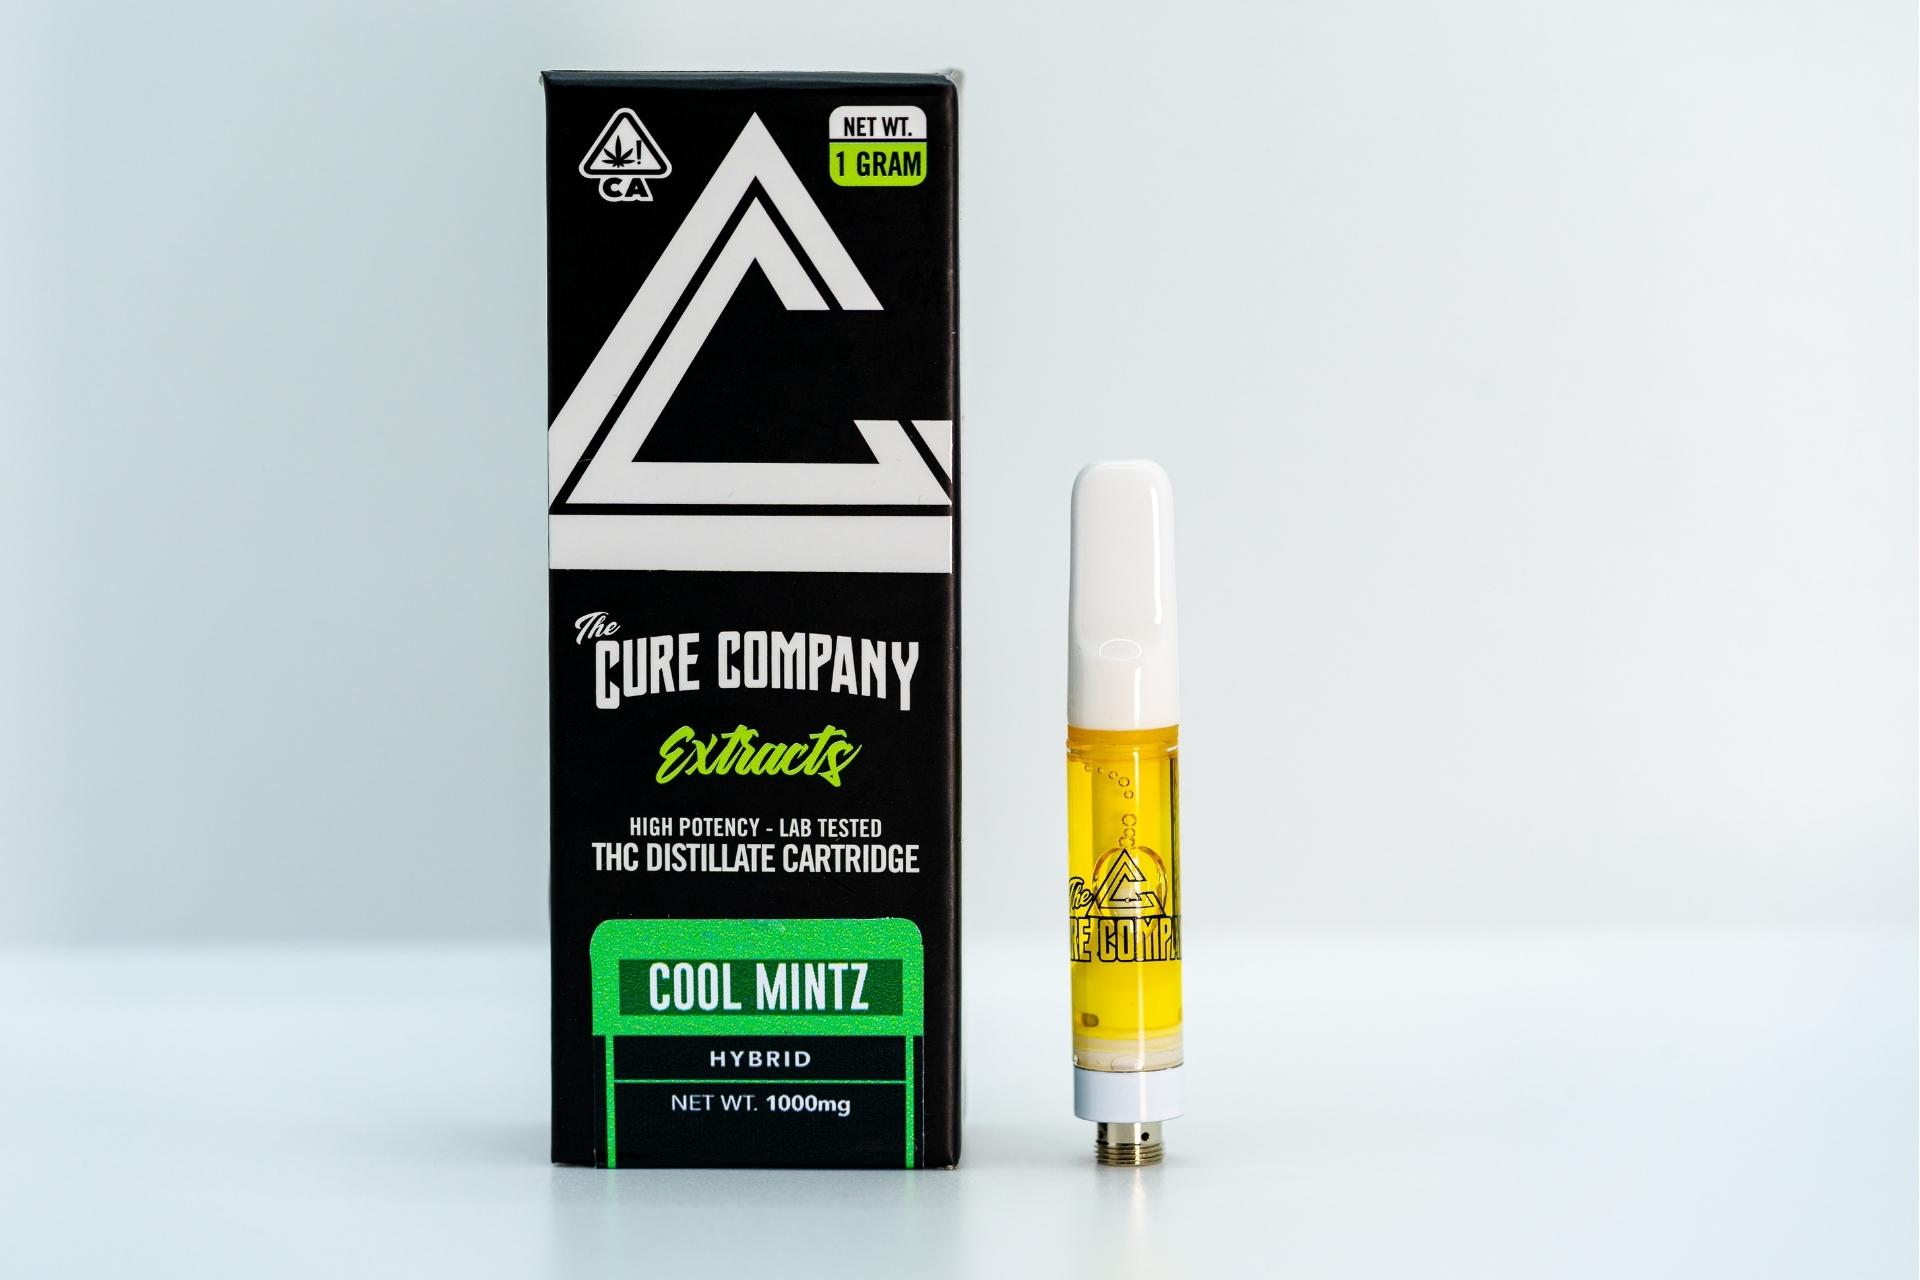 The Complete Guide To Buying Cannabis Vape Products At DTPG